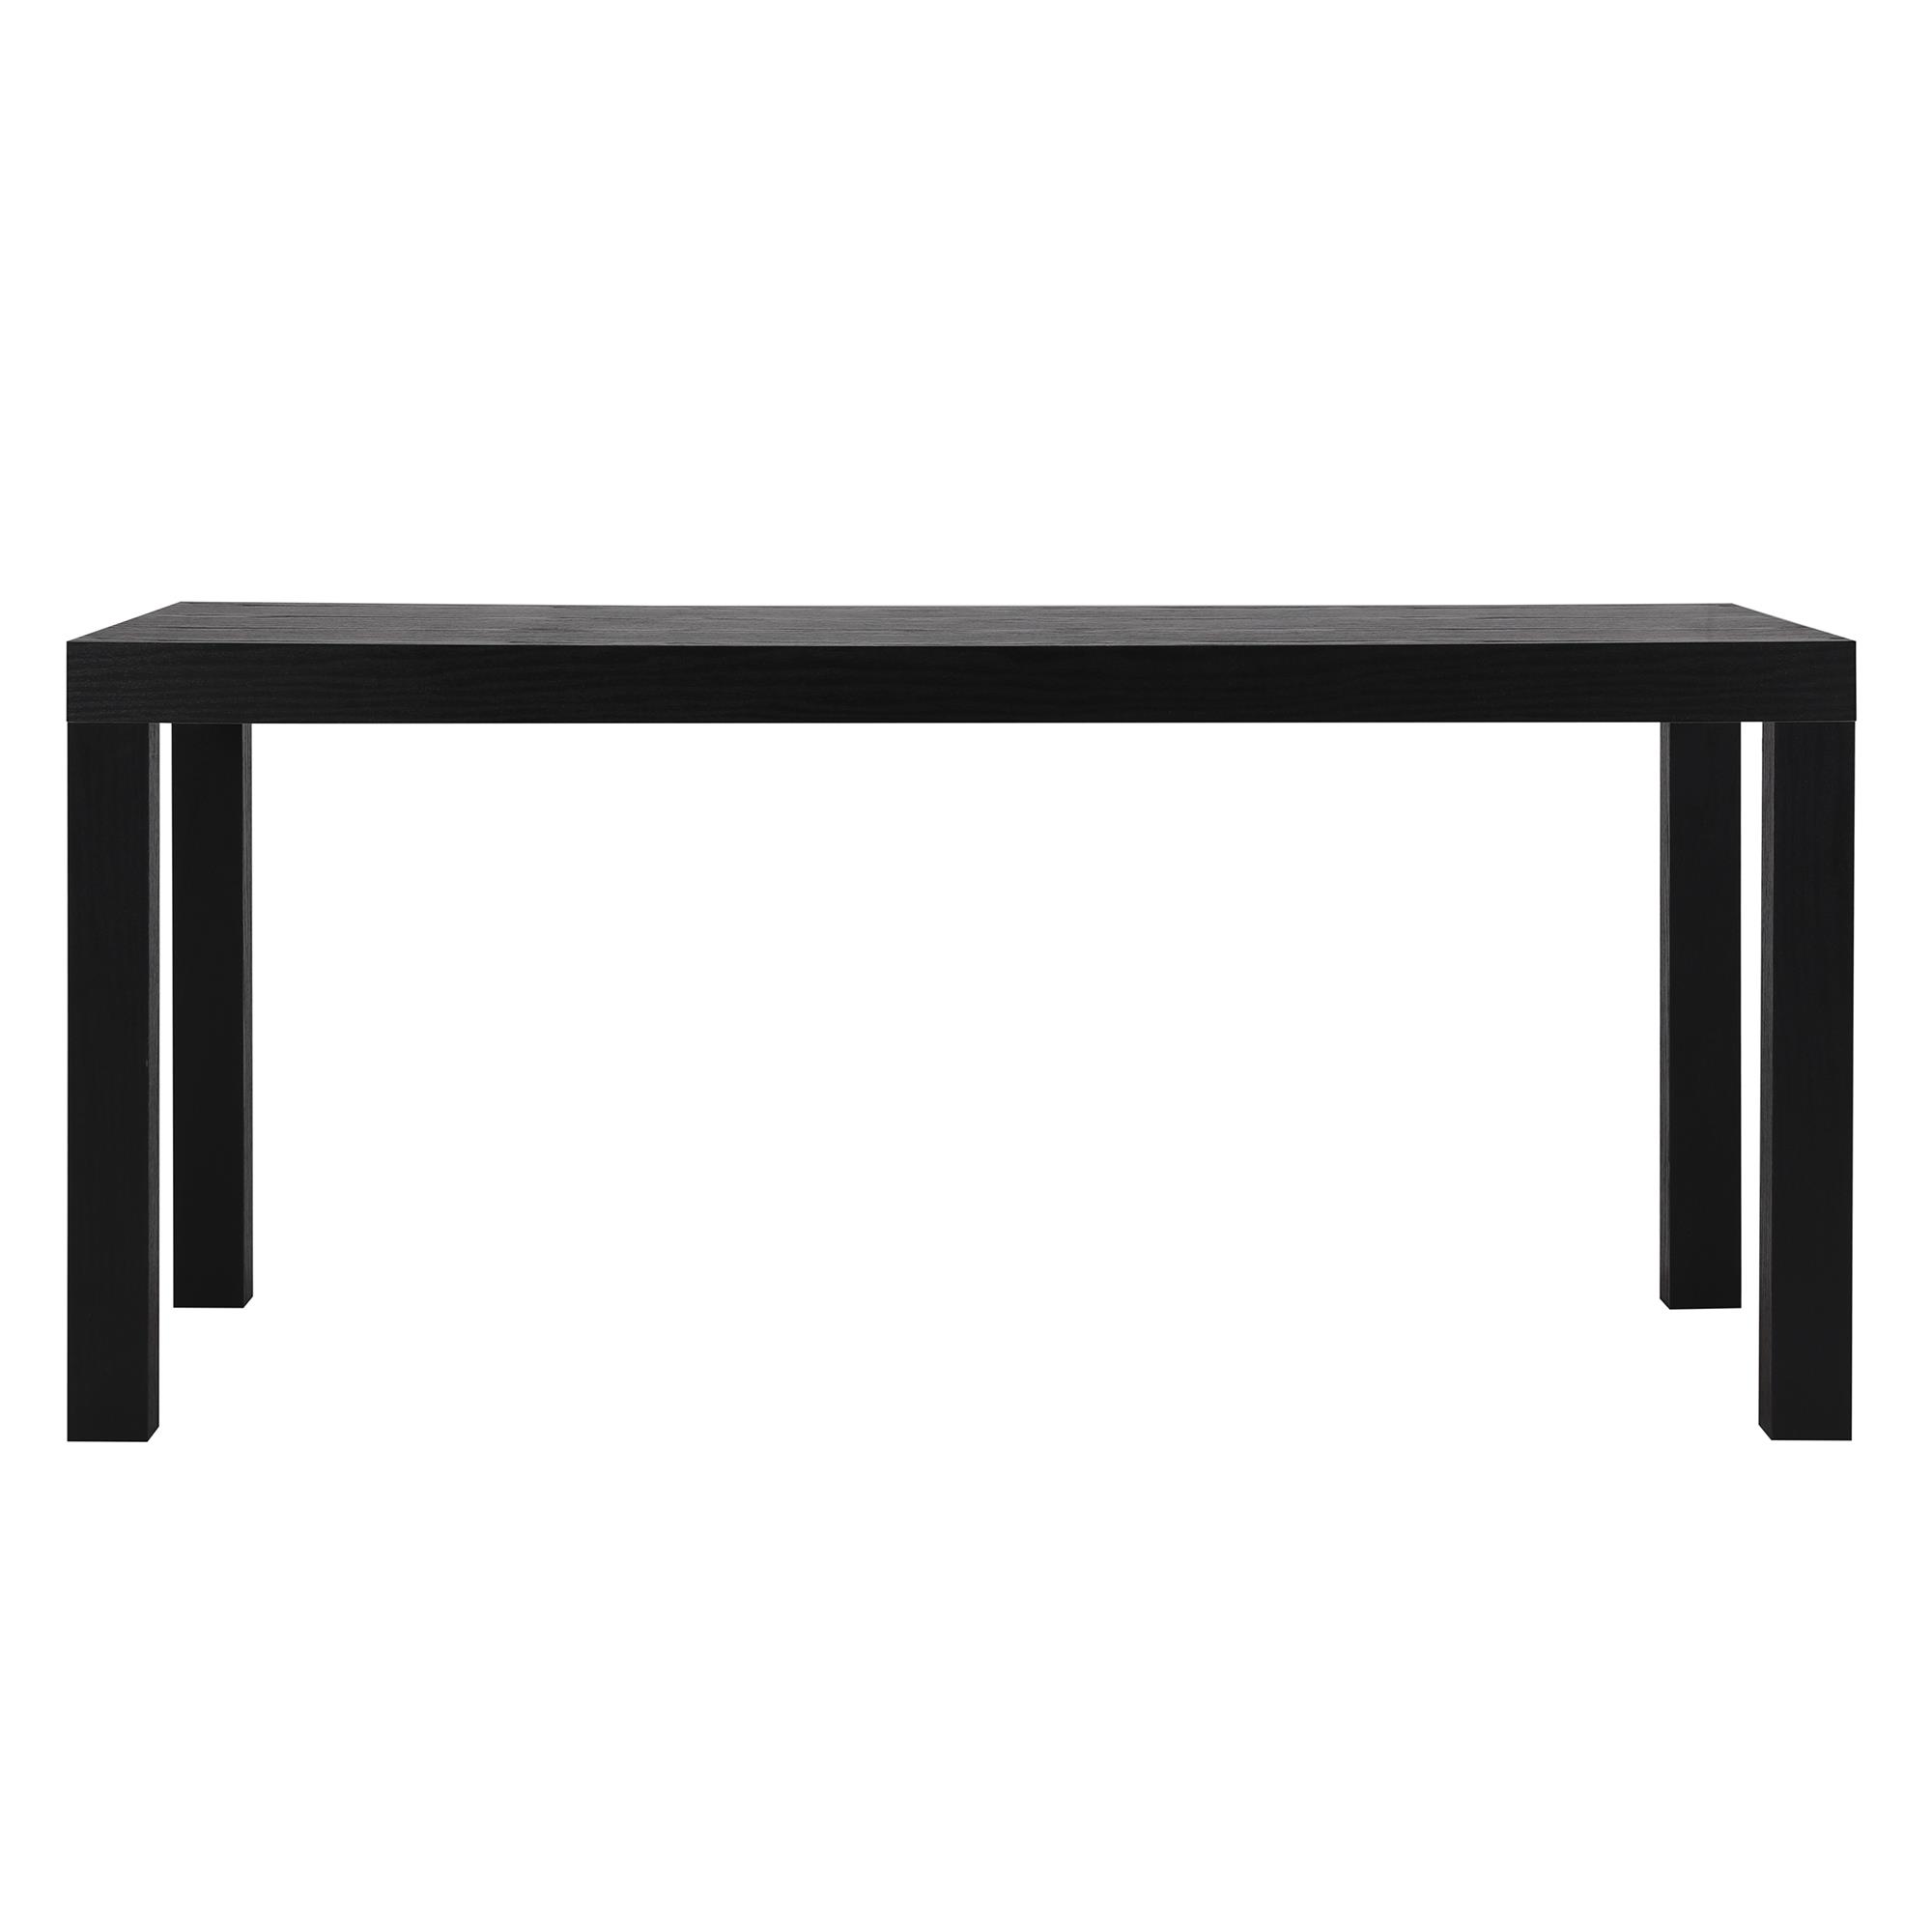 Mainstays Parsons Coffee Table, Black - image 4 of 6